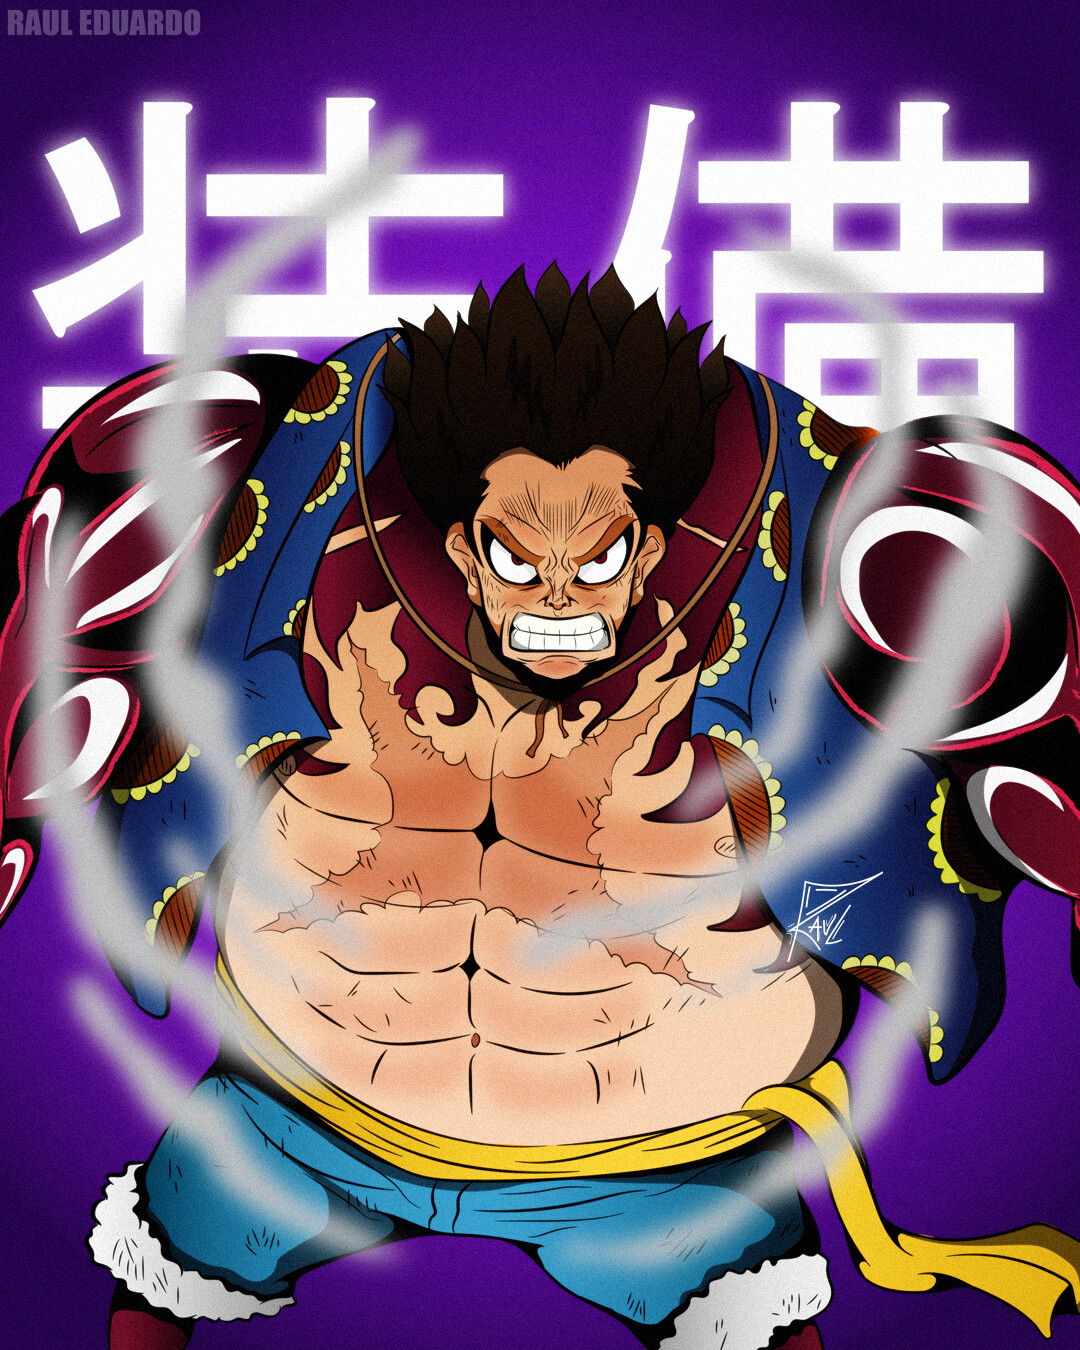 Gear 4 Luffy by Pabloisimo on Newgrounds